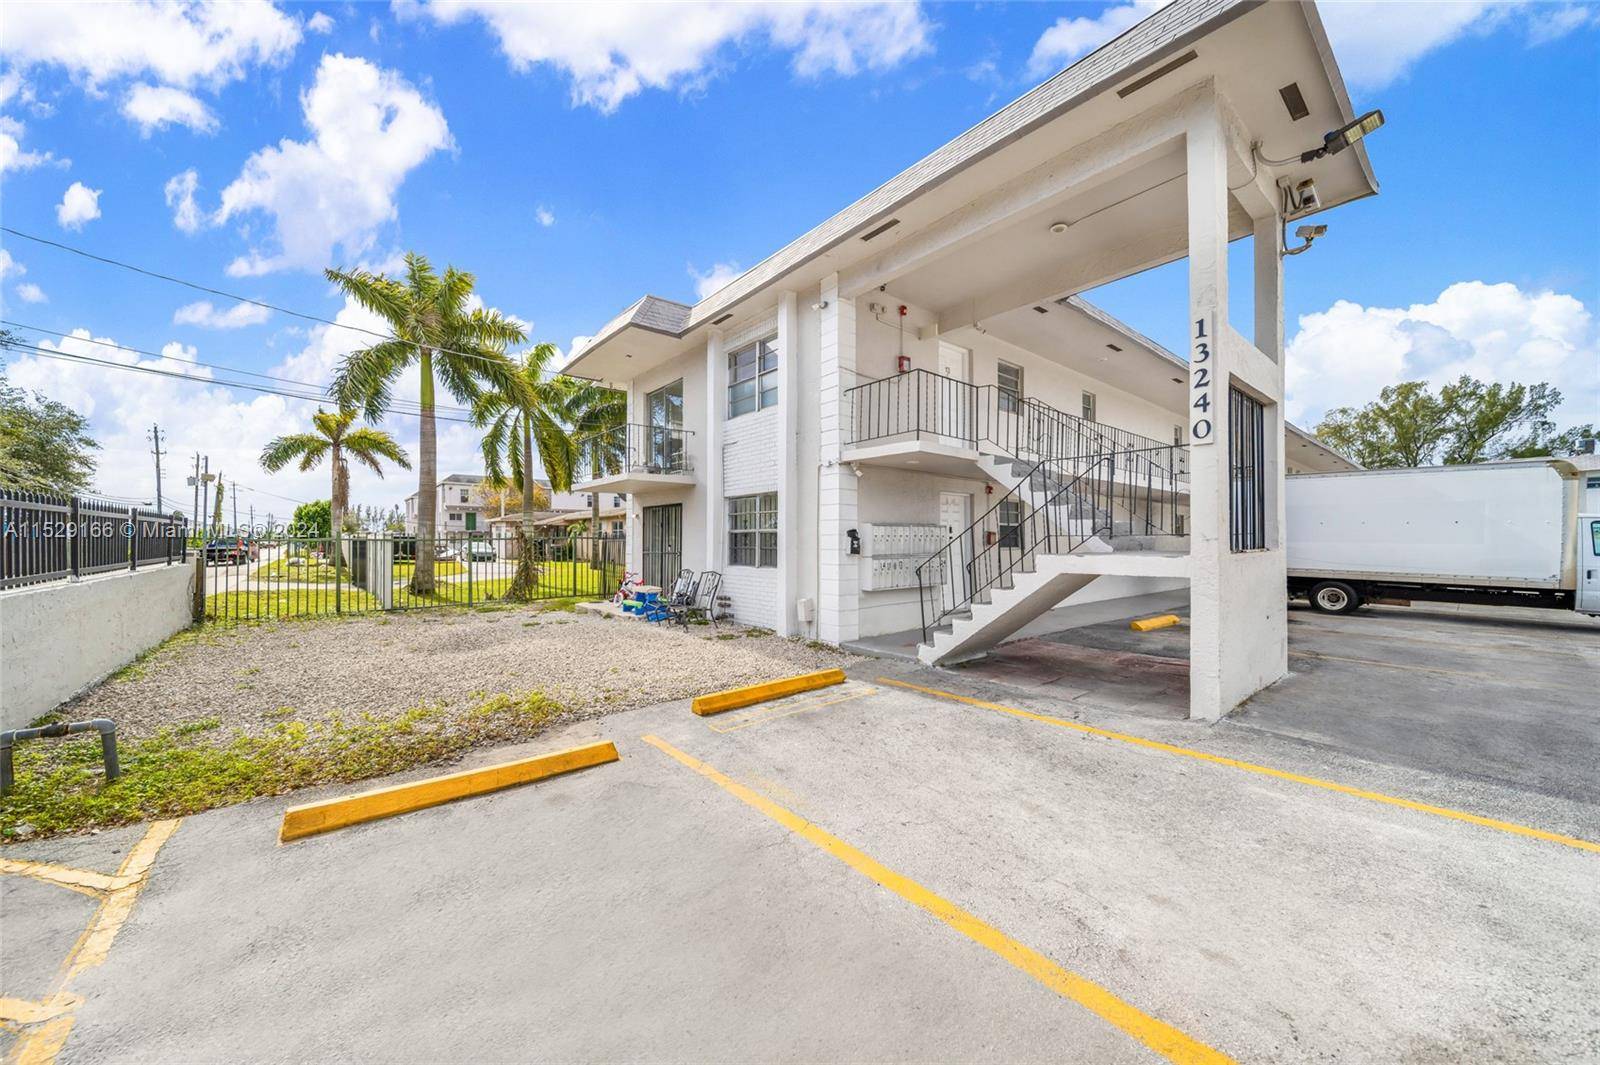 Exciting investment chance in the lively Opa Locka neighborhood of central Miami !